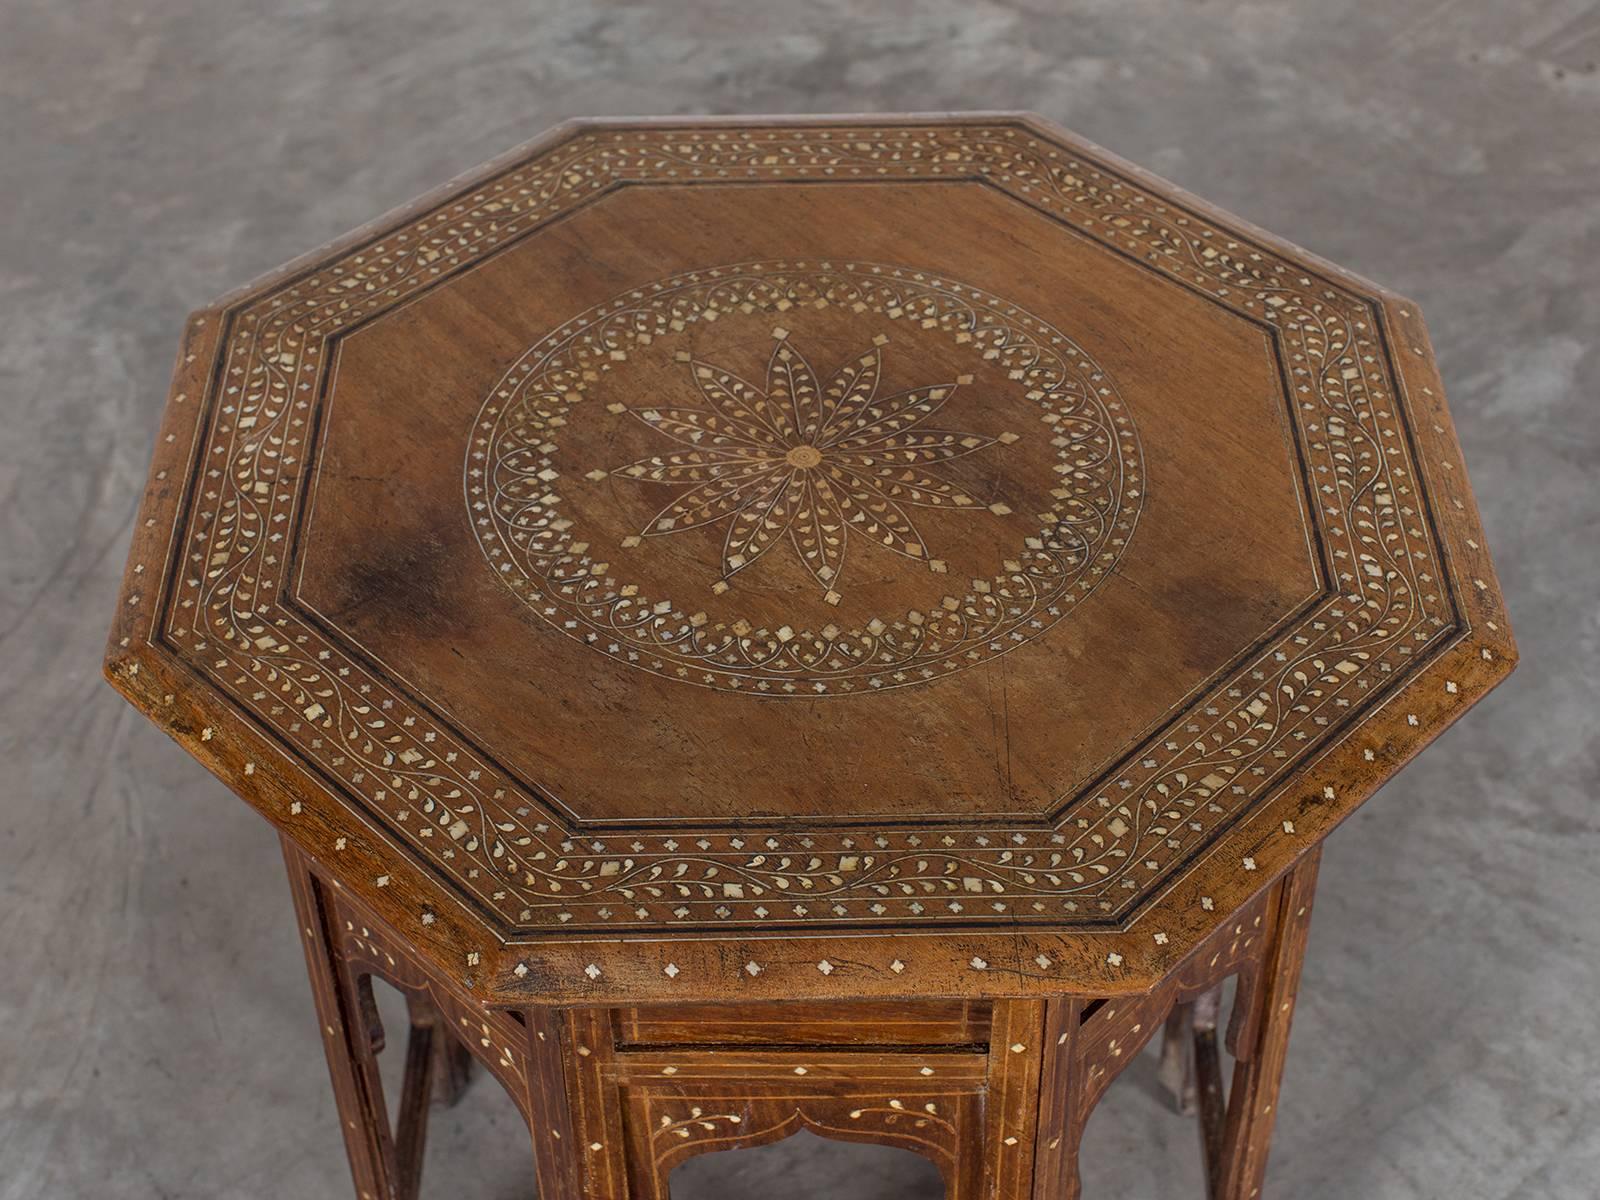 Be the first to see our new listings direct from 1stdibs! Please click "Follow" below.

A handsome Orientalist octagonal inlaid walnut table circa 1890. Turkish in inspiration, octagonal tables of this form were made in several parts of